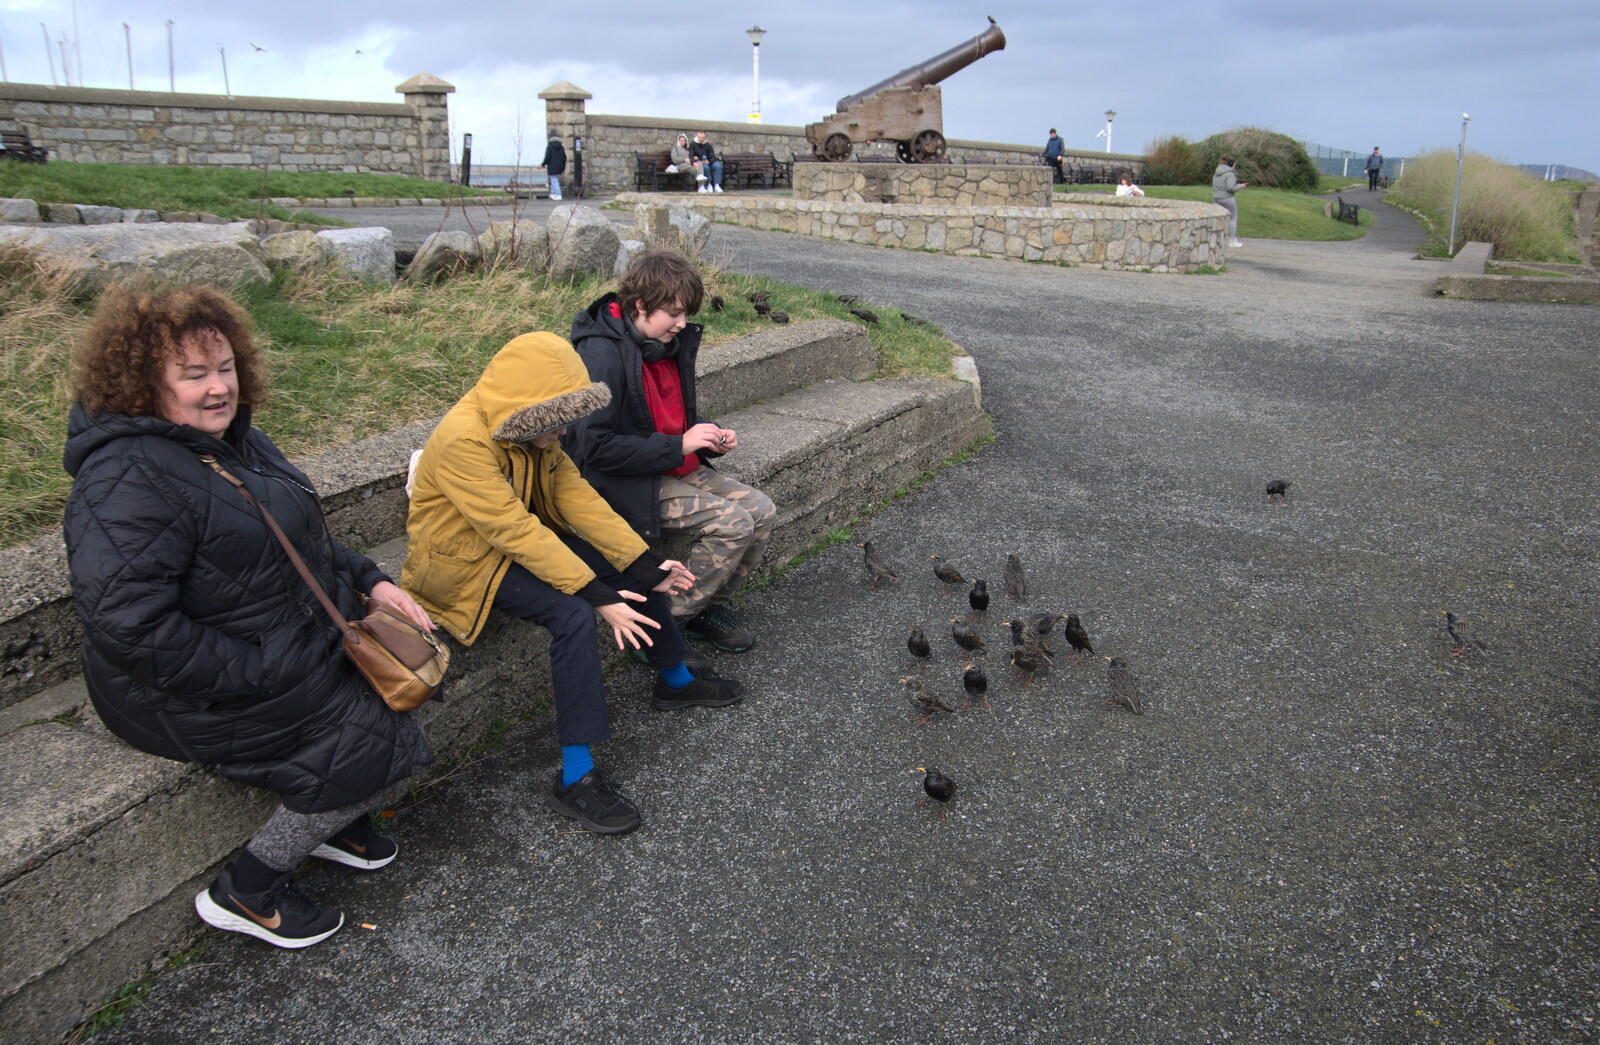 The End of the Breffni, Blackrock, Dublin - 18th February 2023: Harry tries his Ninja moves on the starlings